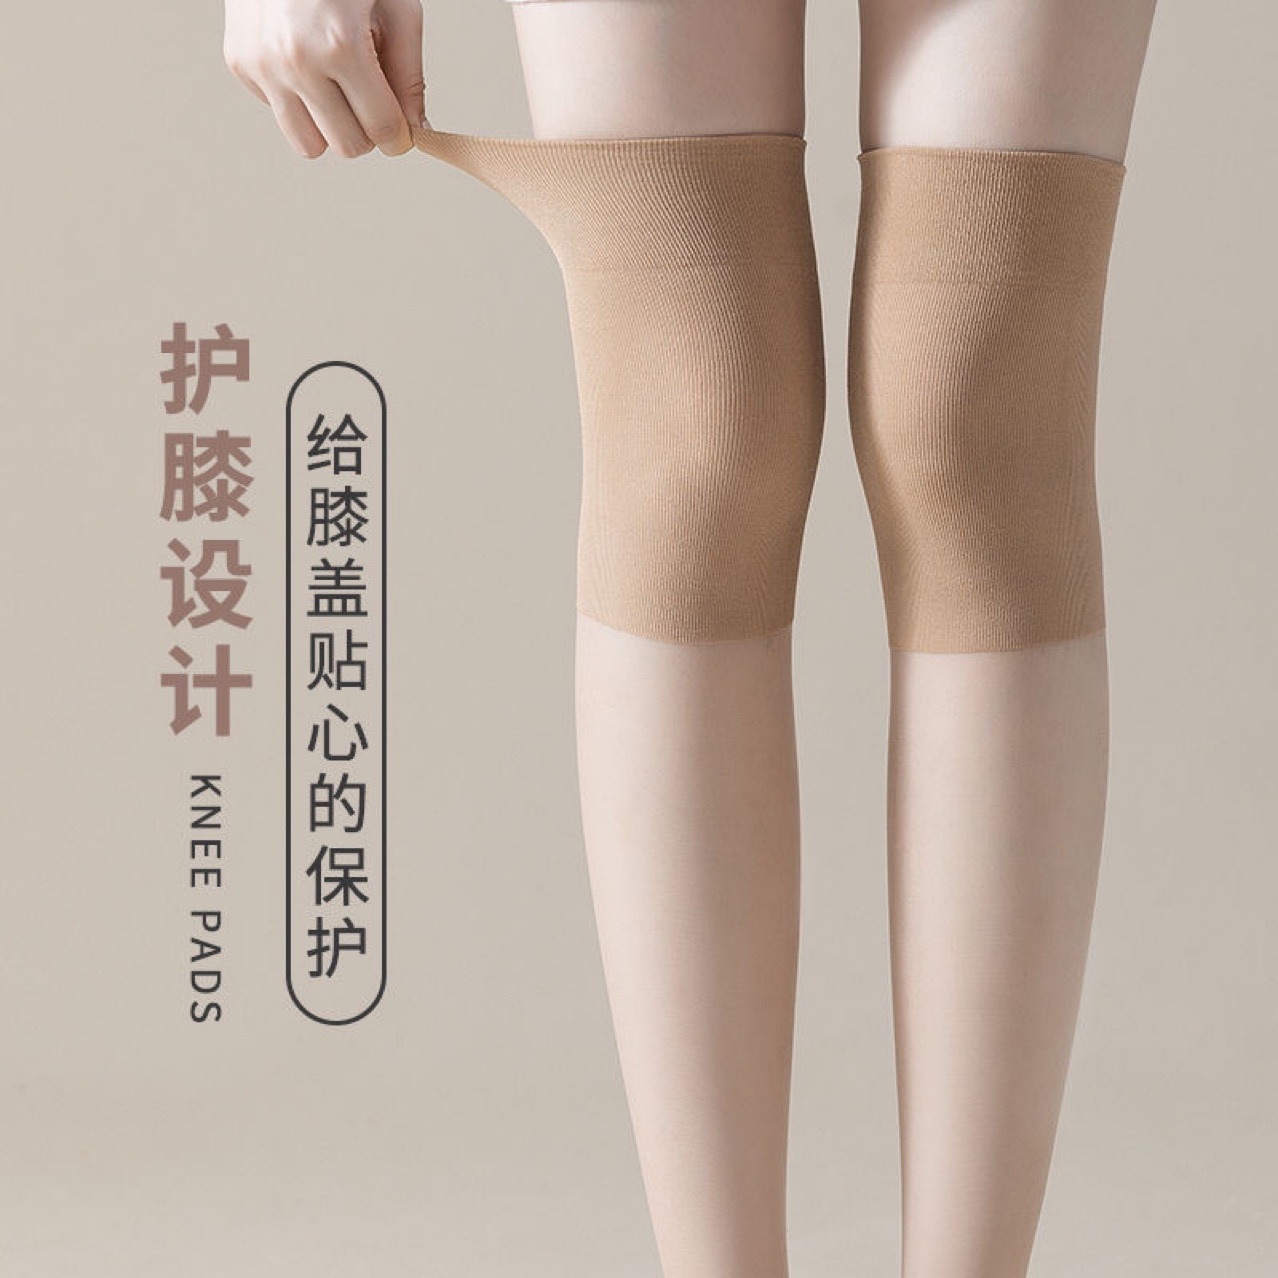 Women's Long Stockings with Knee Pad Air-Conditioned Room Mid-Length Thigh High Socks Knee Socks Spring Autumn Summer Ultra-Thin